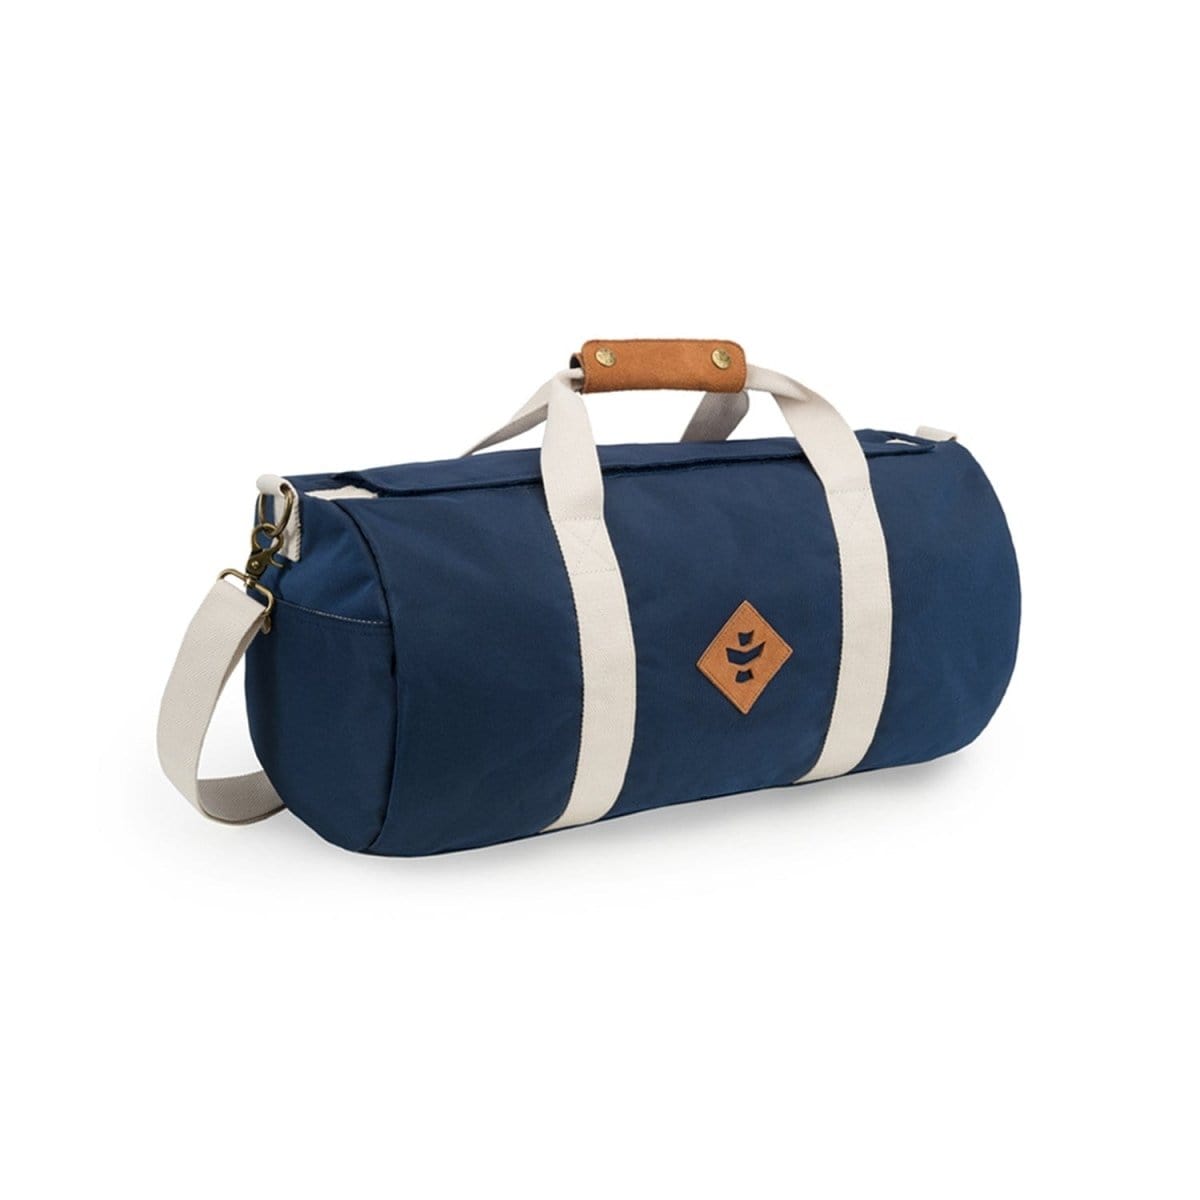 Revelry Supply Travel Bag Navy Blue The Overnighter - Smell Proof Small Duffle